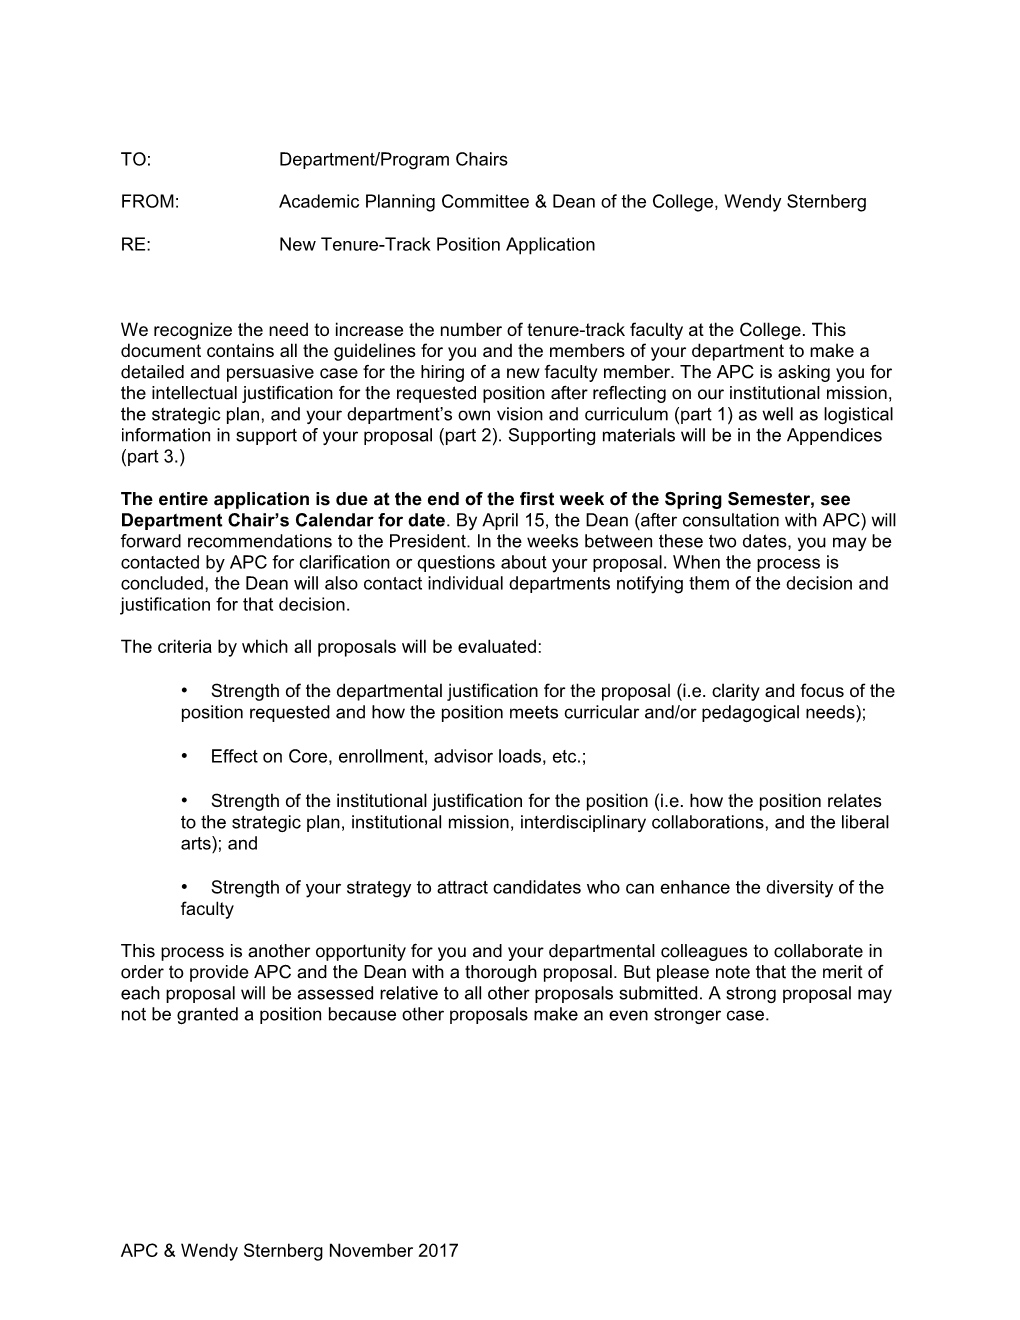 Application for a New Tenure-Track Faculty Position